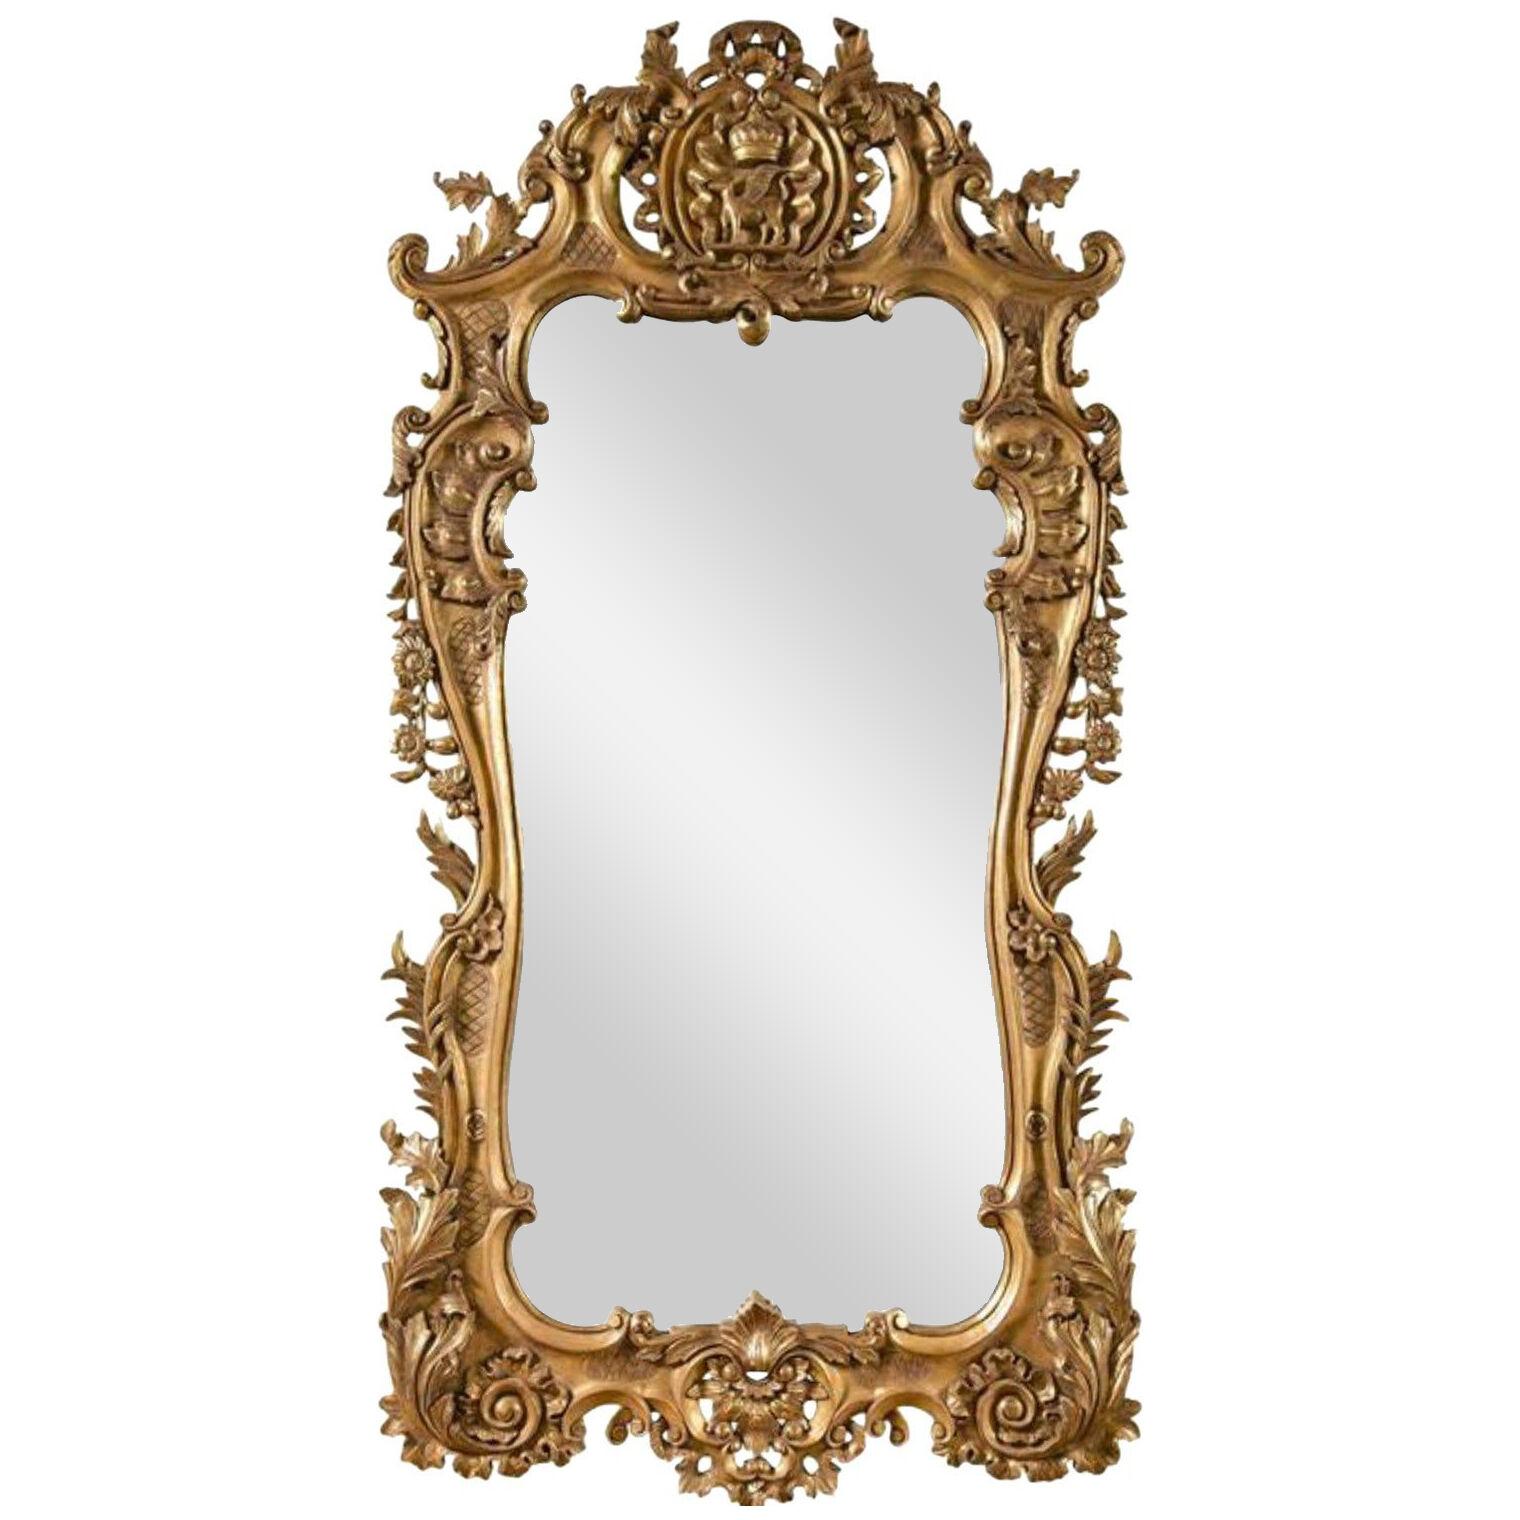 Monumental Louis XV Style Giltwood Mirror Exquisite Details	